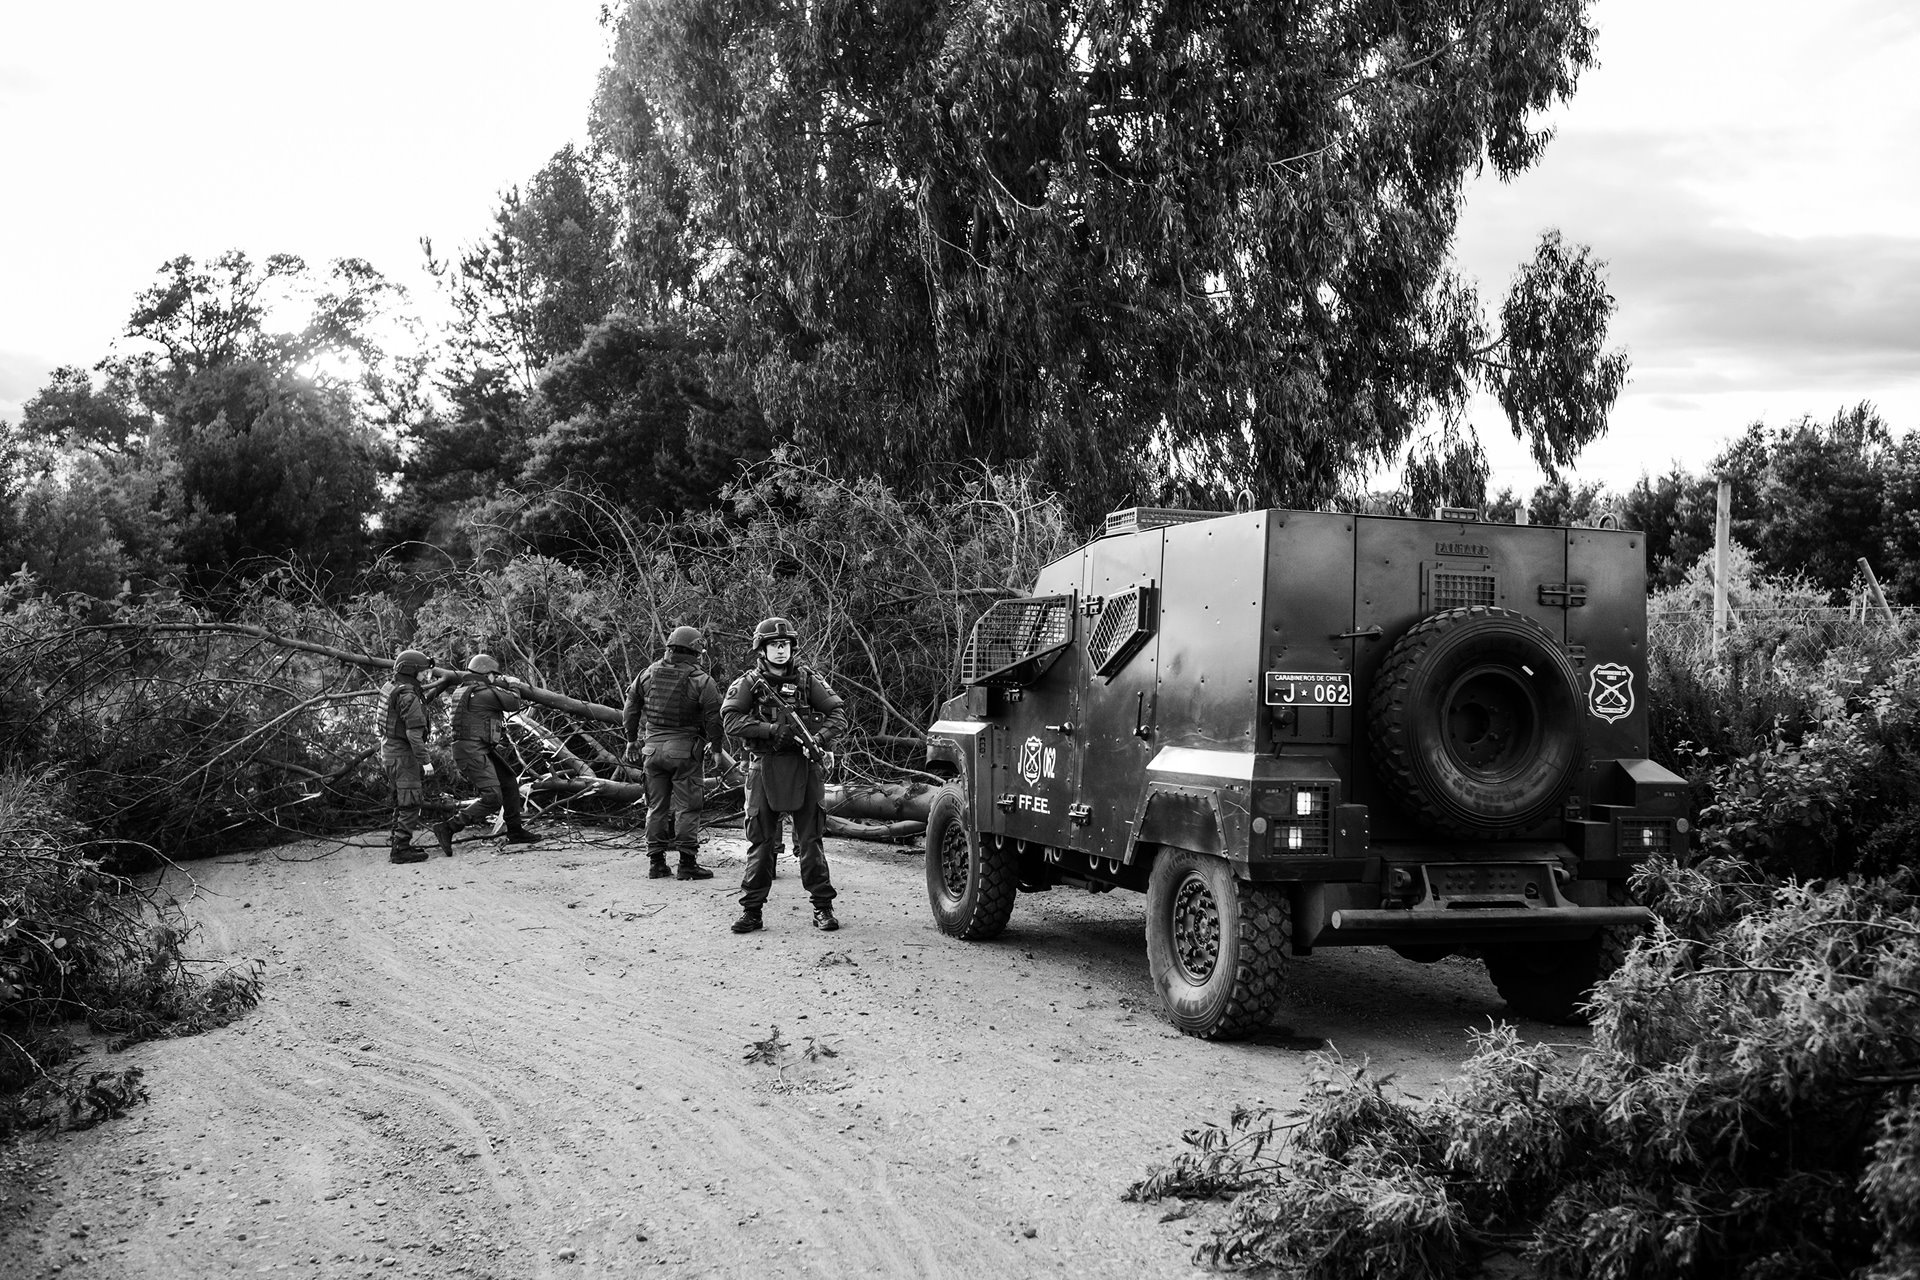 A Chilean police unit encounters a blockade of eucalyptus trees placed across a road in Ercilla, Araucanía. Some Mapuche communities erect such barriers to assert territorial rights.